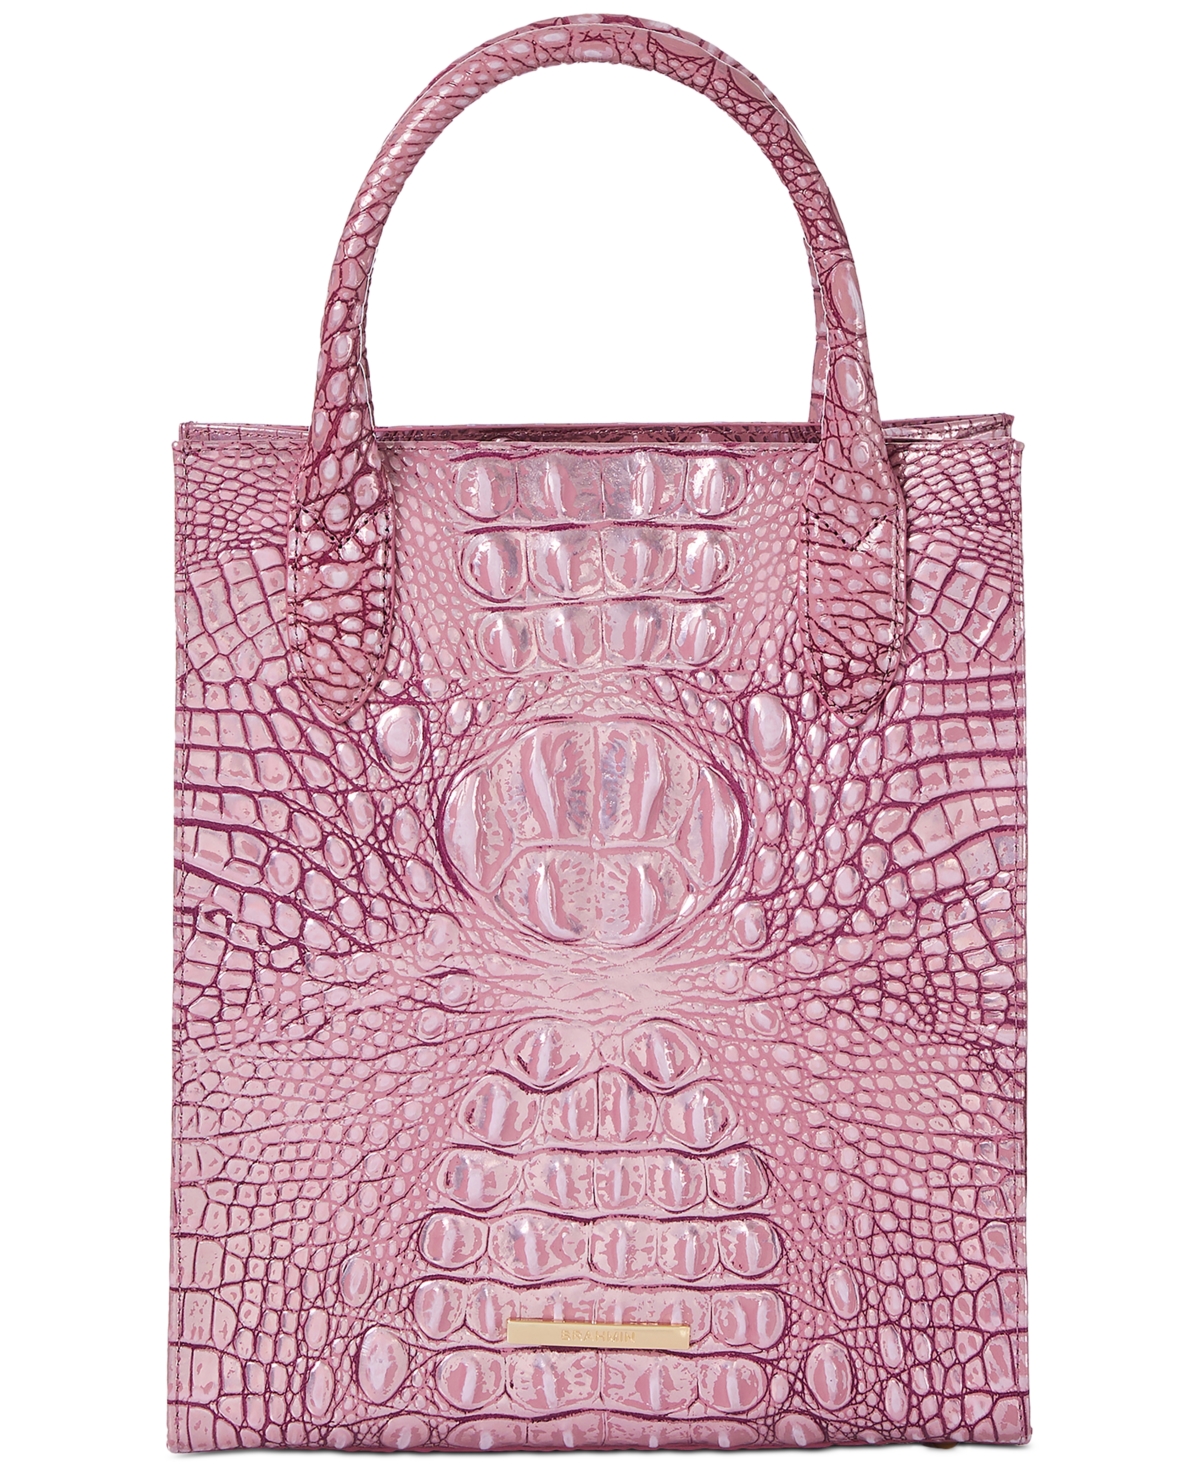 Moira Mulberry Potion Melbourne Tote - Mulberry Potion Melbourne